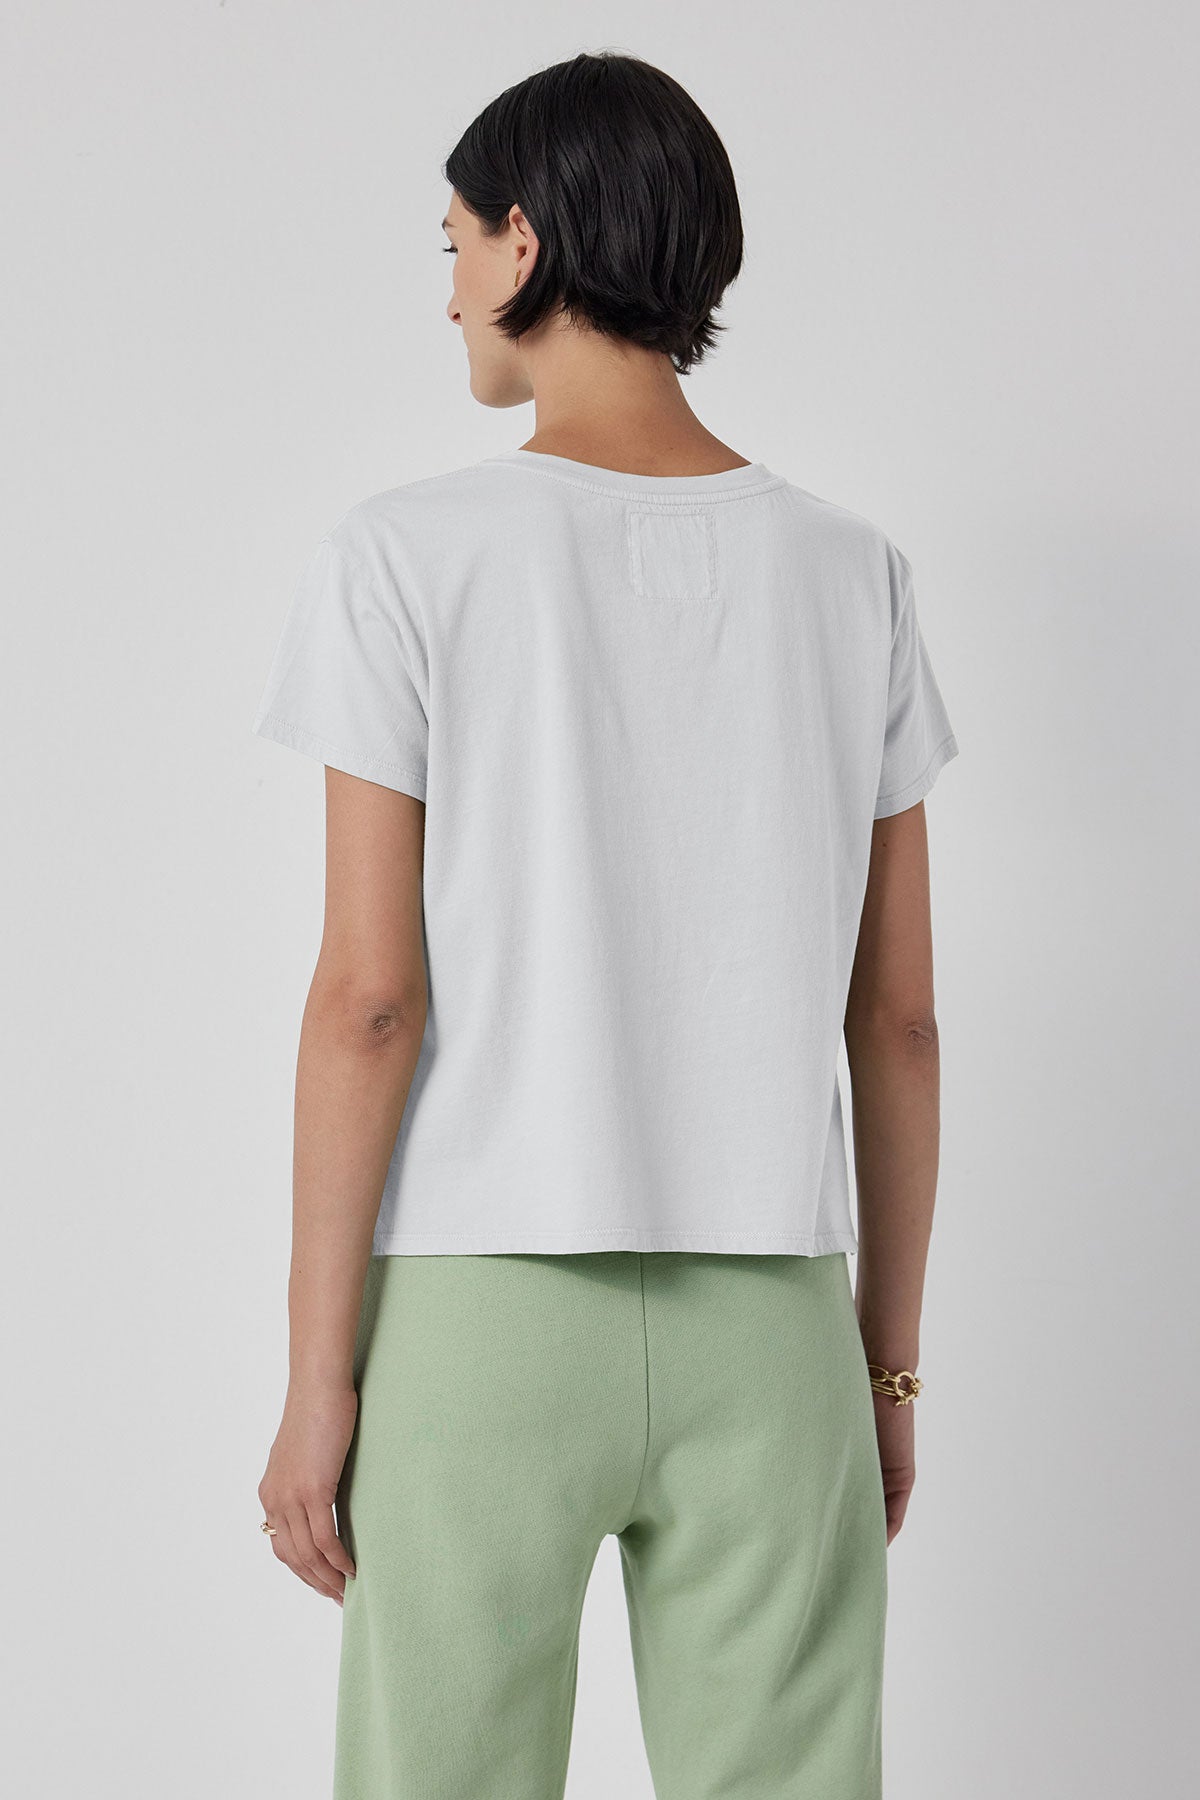 The back view of a woman wearing a white Velvet by Jenny Graham TOPANGA TEE and green sweatpants.-36212410581185